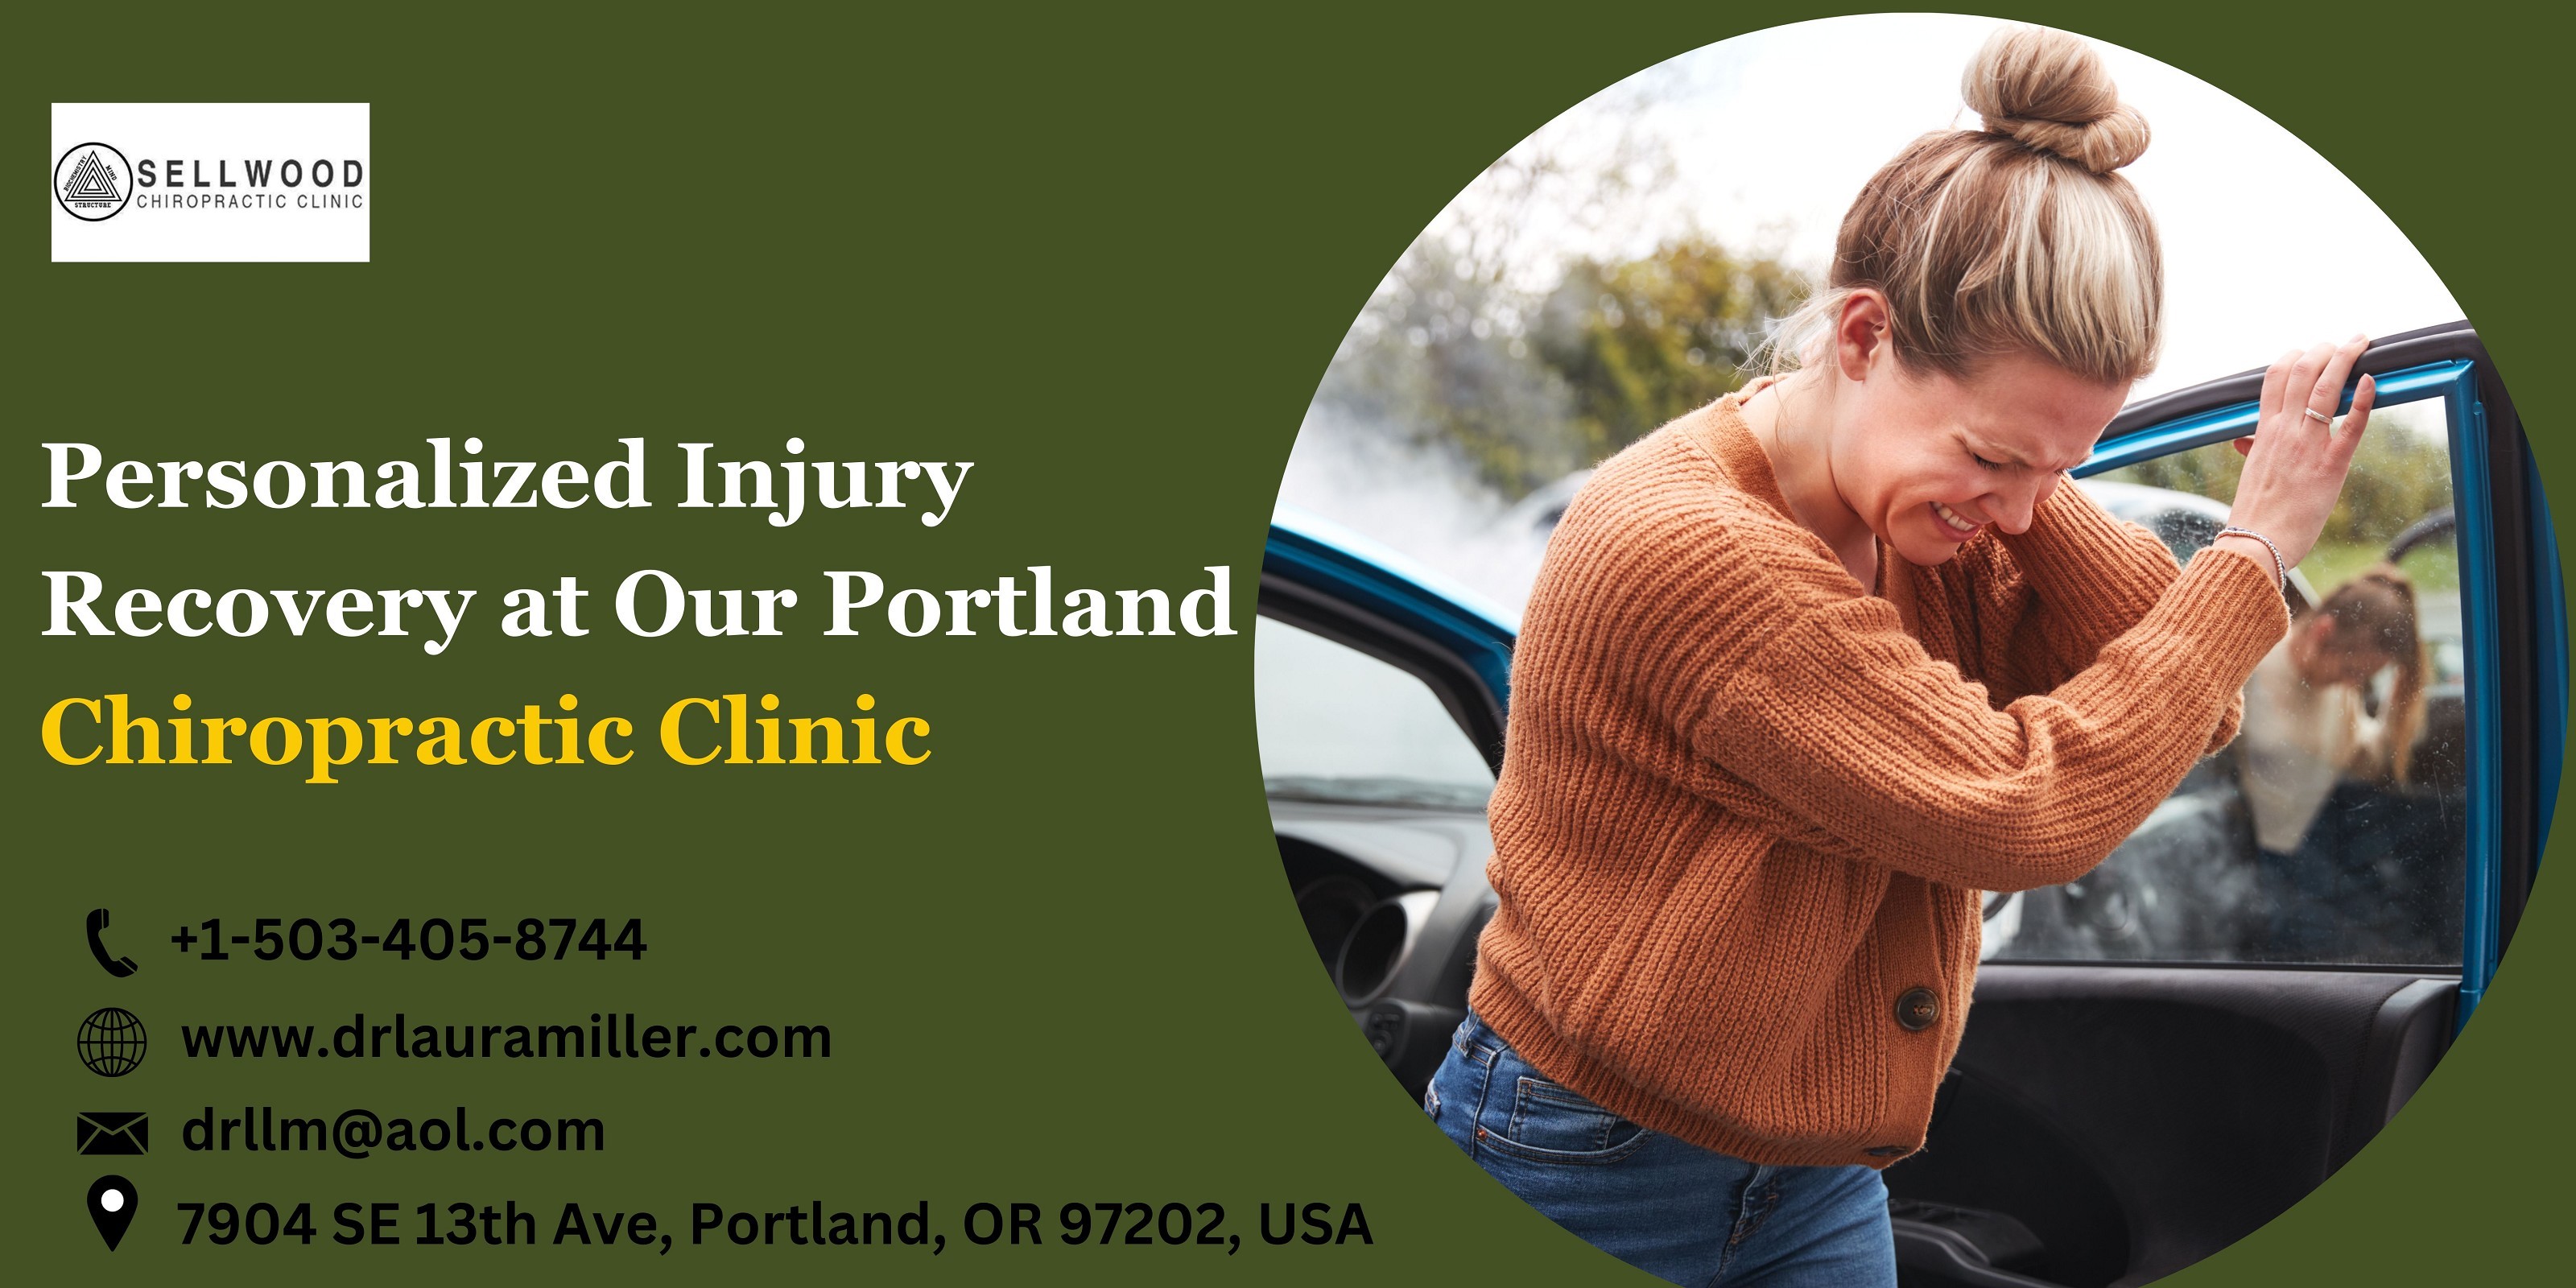 Personalized Injury Recovery At Our Portland Chiropractic Clinic